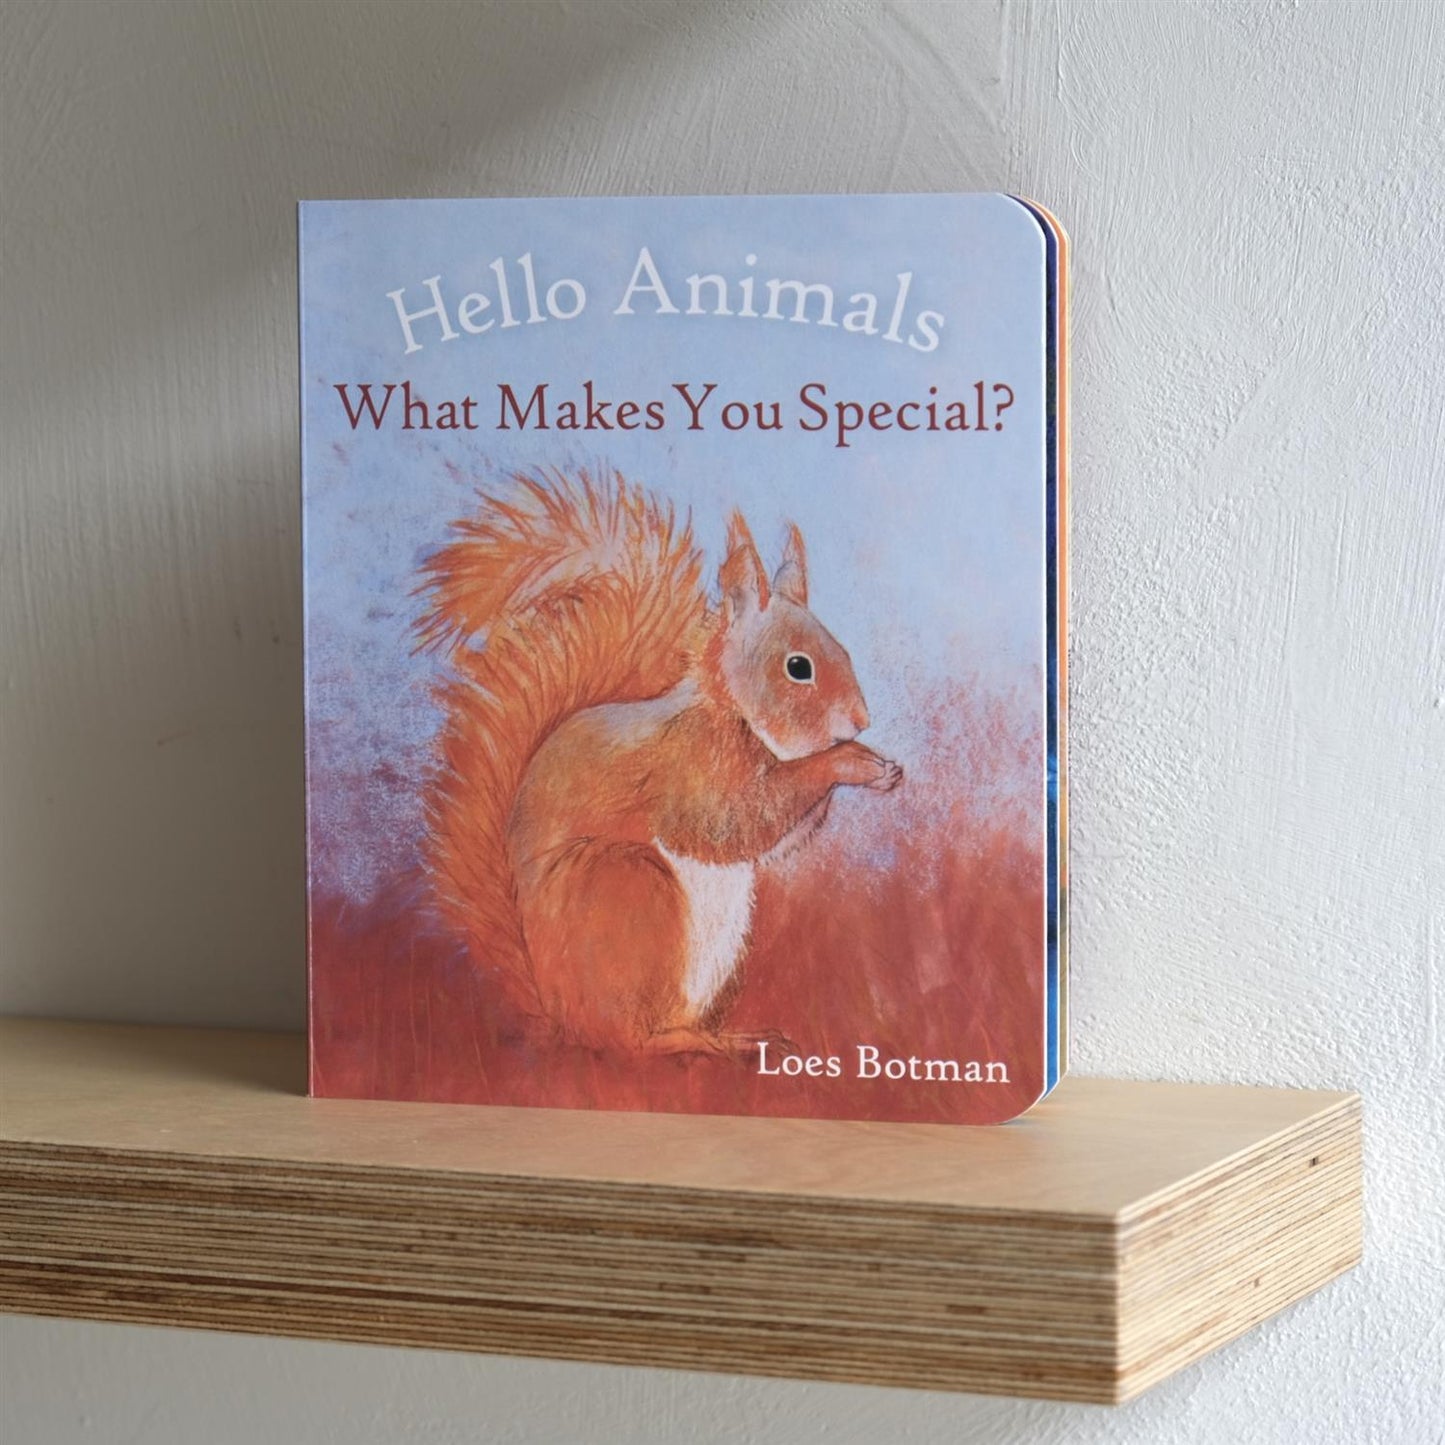 Hello animals, what makes you special? - Loes Botman